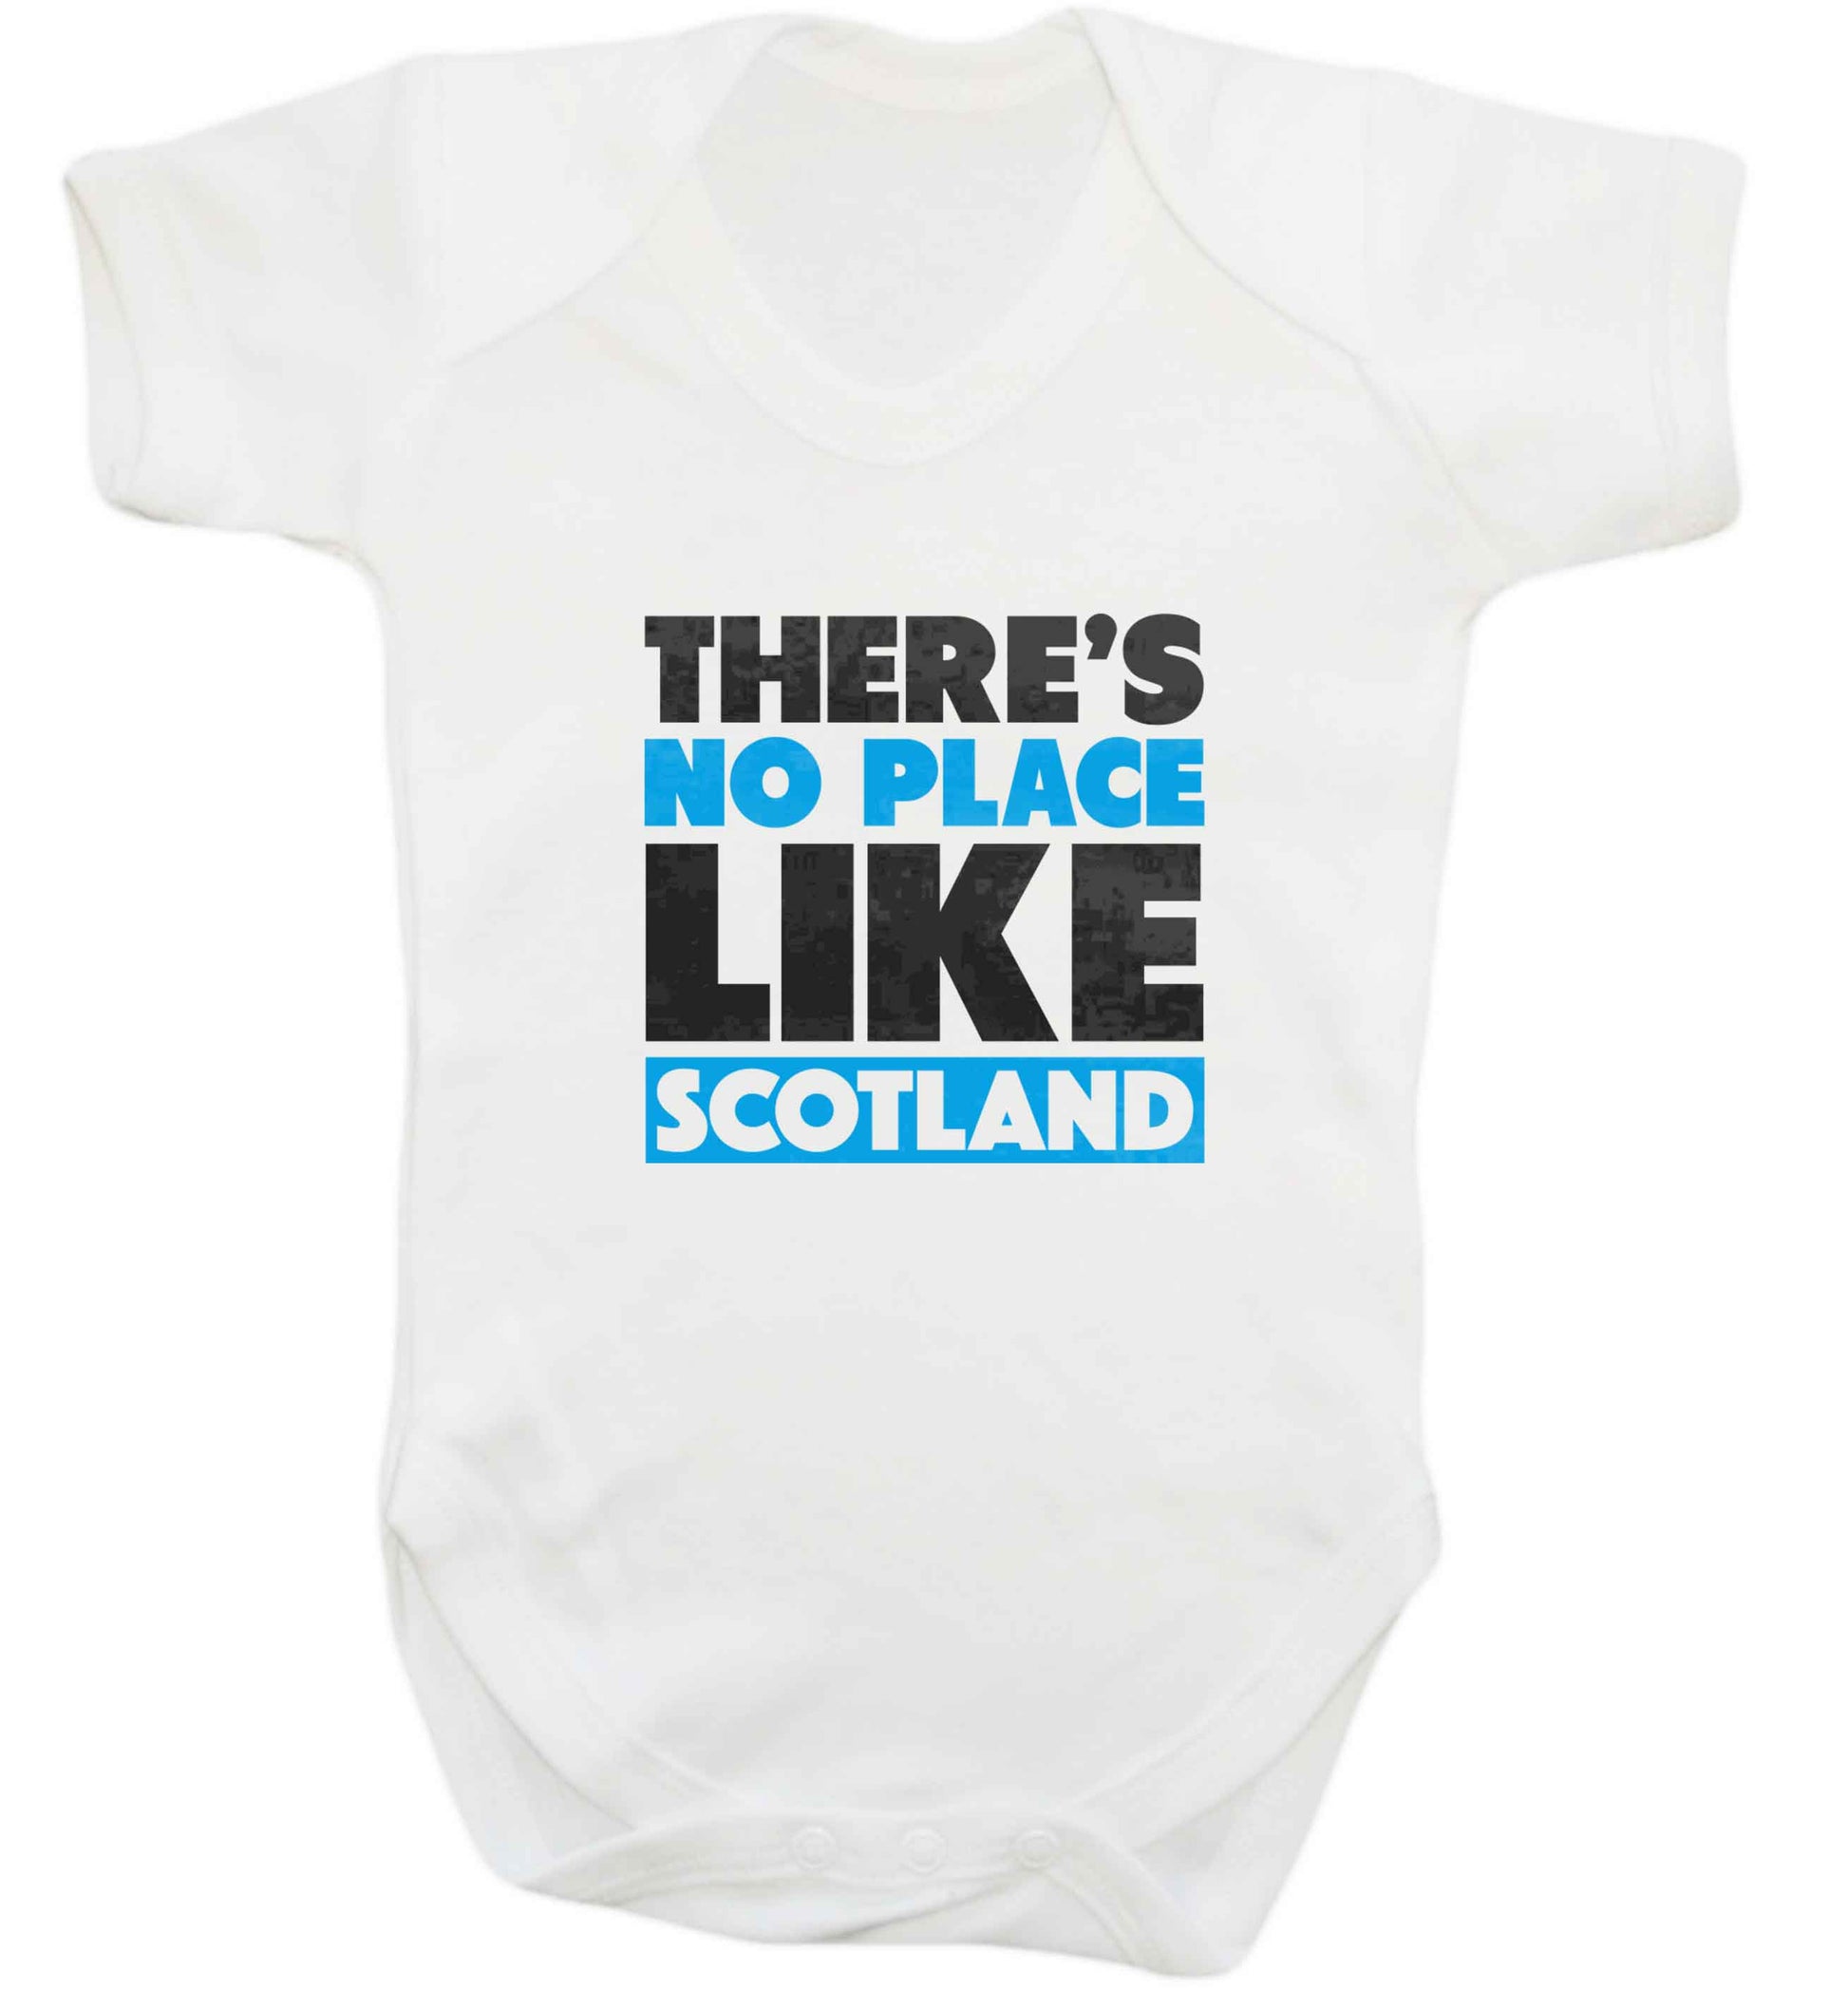 There's no place like Scotland baby vest white 18-24 months